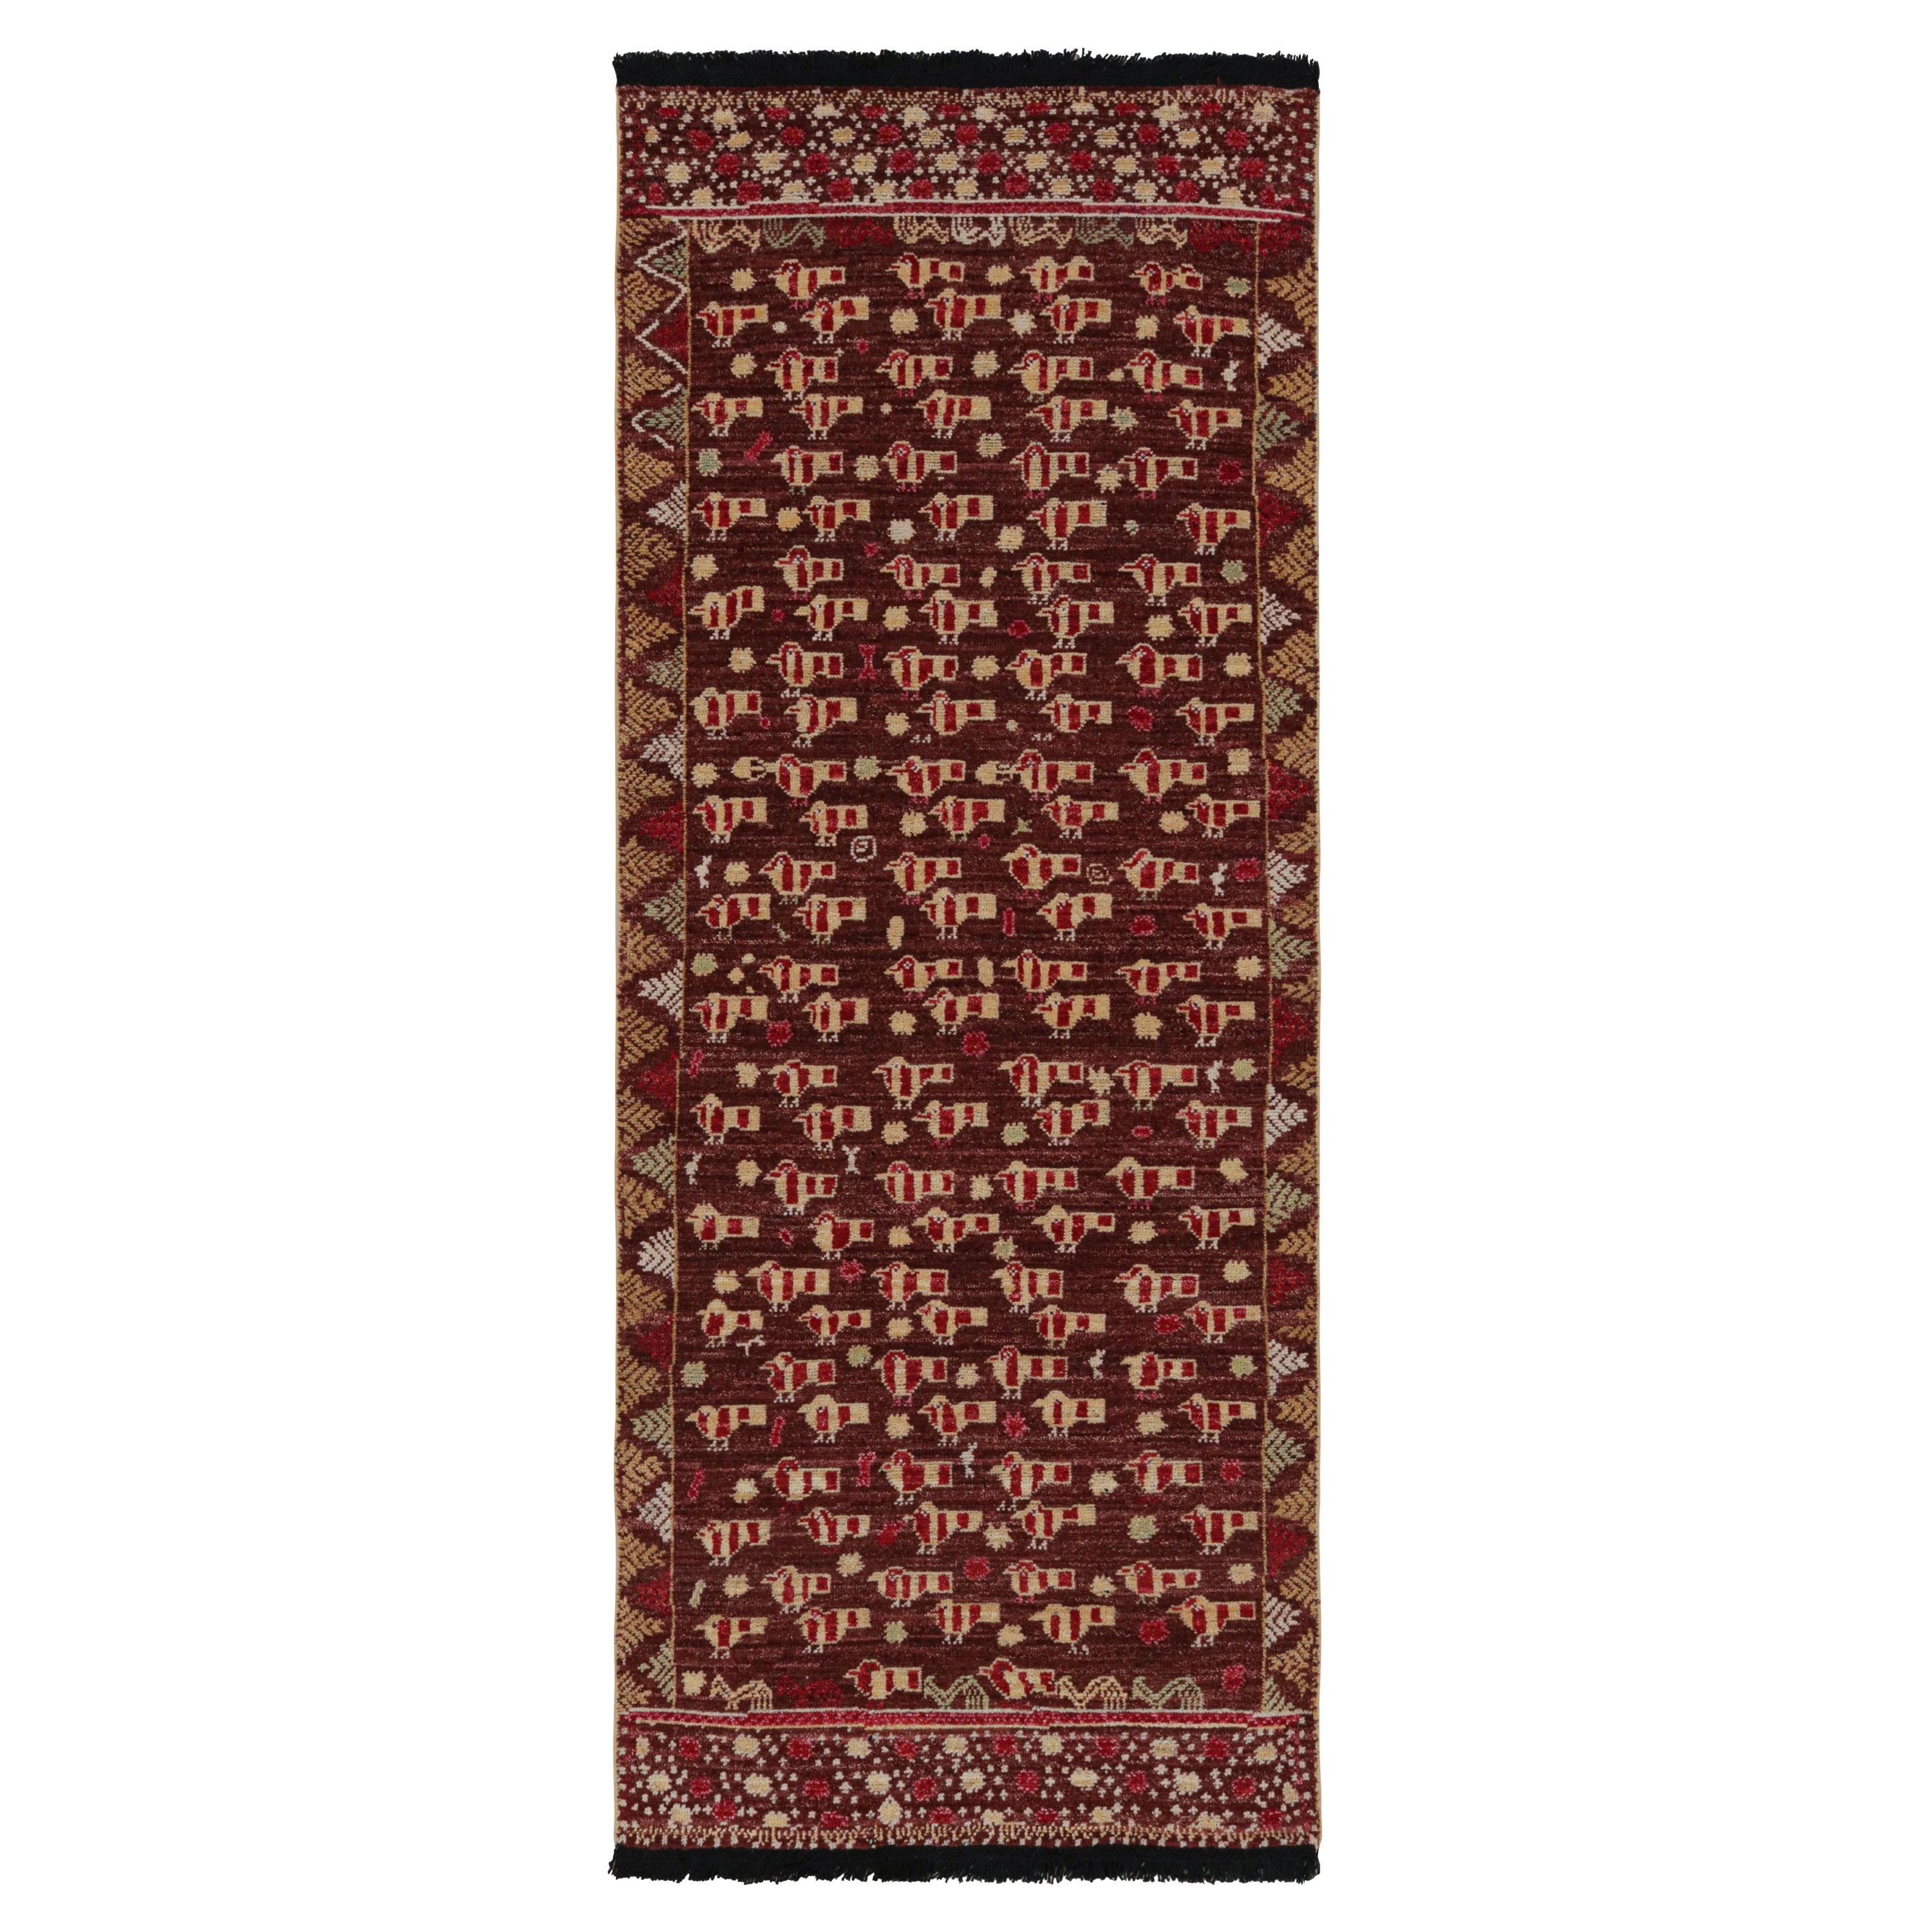 Rug & Kilim’s Tribal Style Runner Rug in Red and Gold Geometric Patterns For Sale